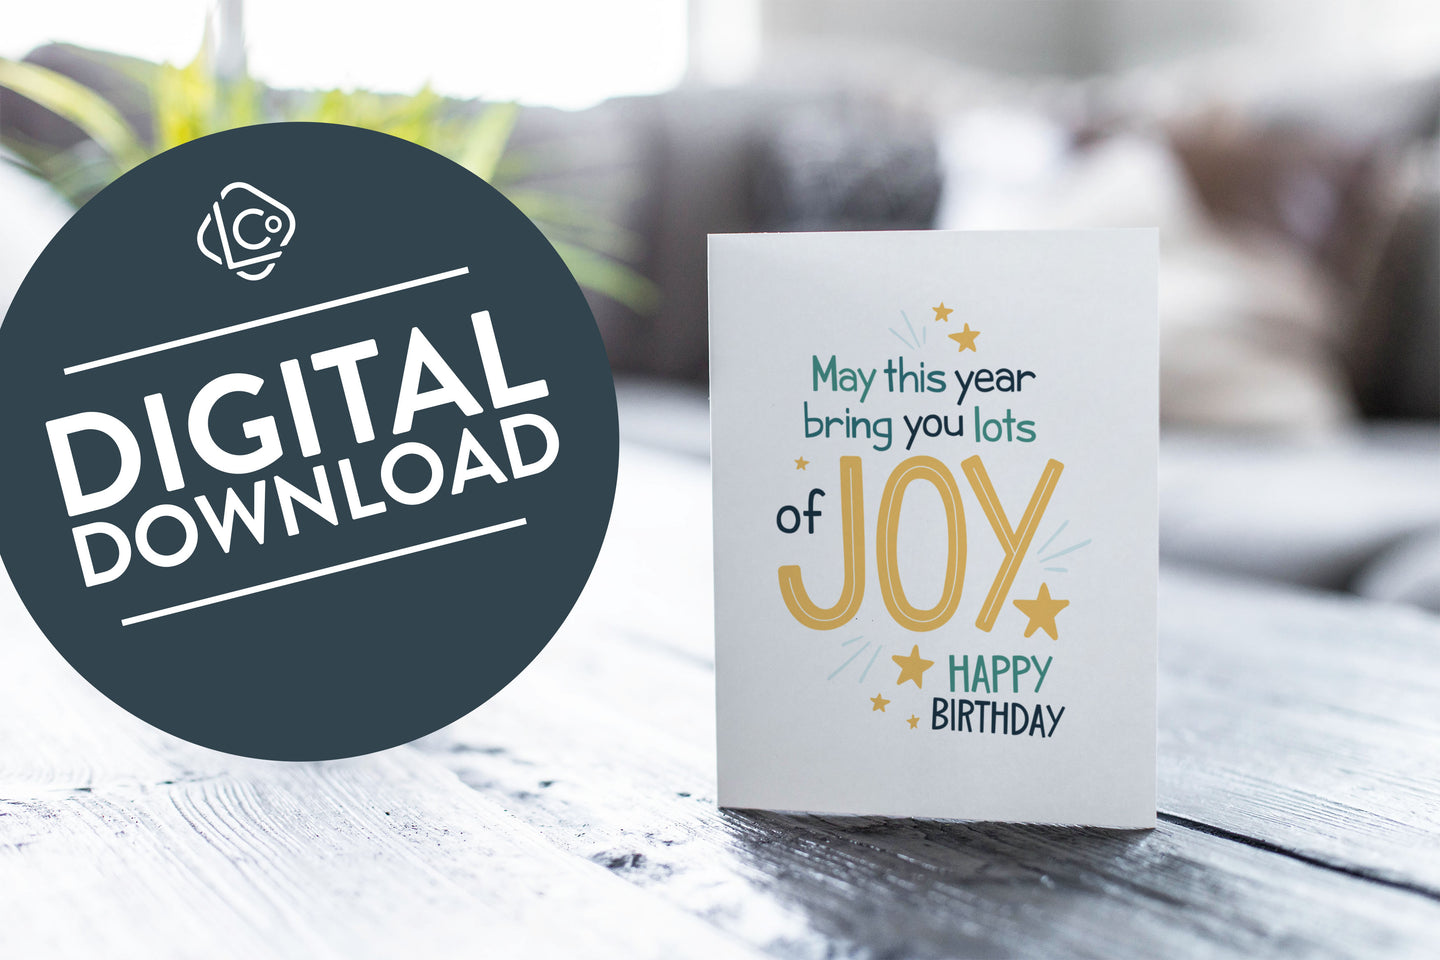 A greeting card is featured on a wood coffee table with a green plant in a white planter in the background. The card features the words “May This Year Bring You Lots of Joy Happy Birthday.”  The words 